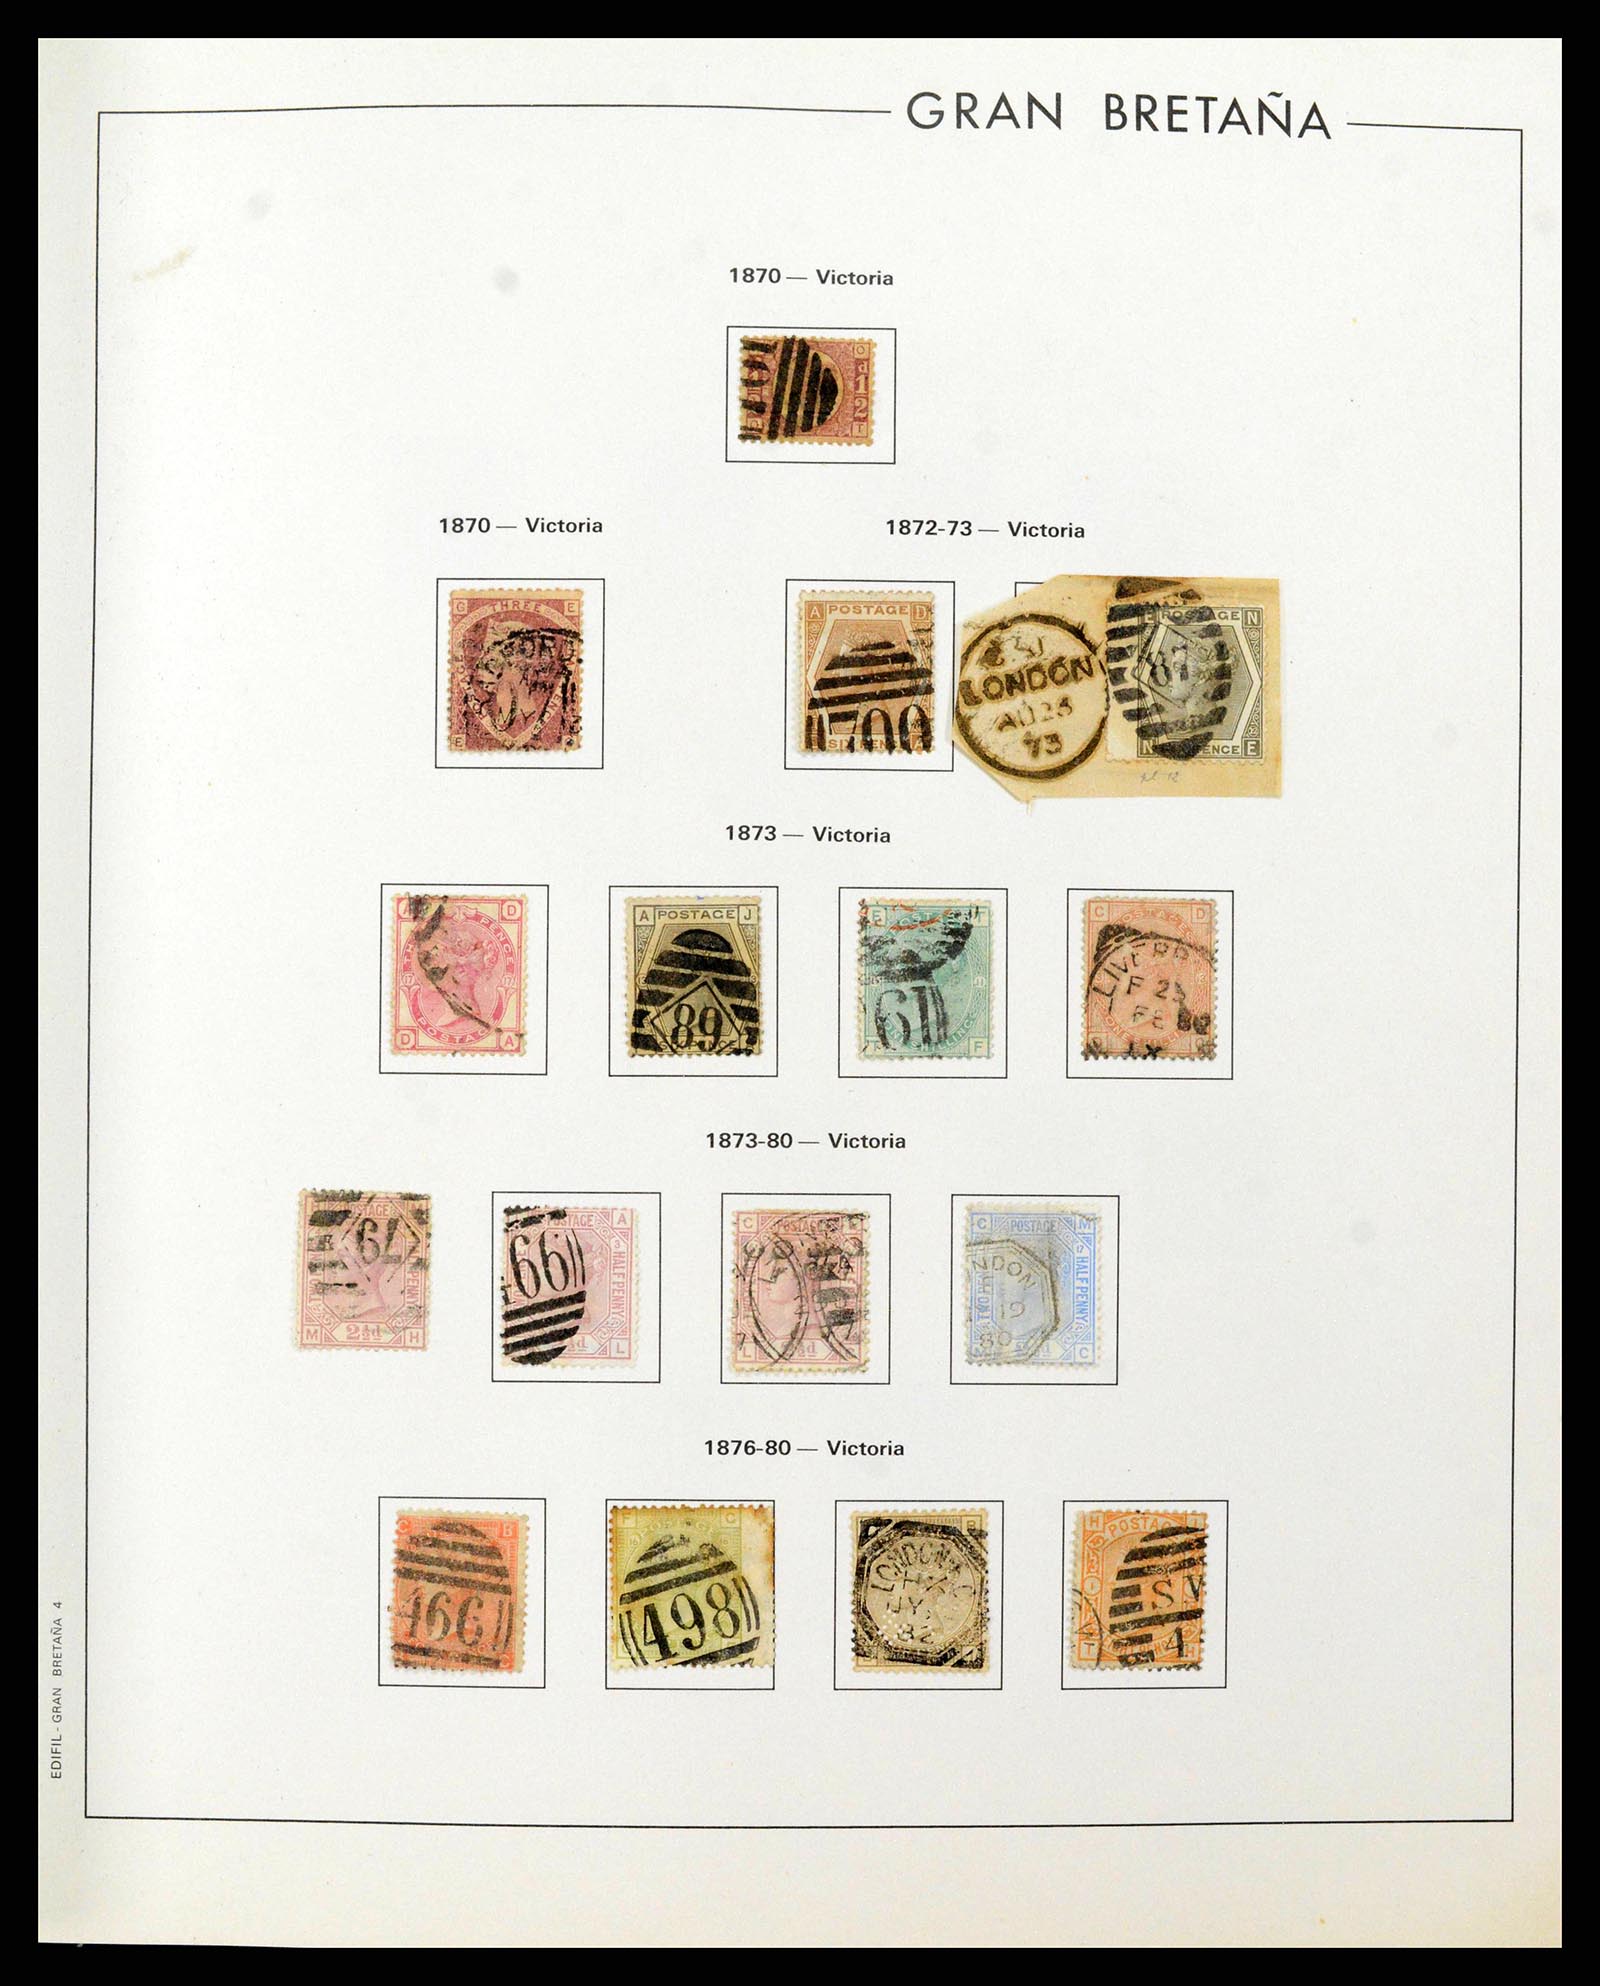 38924 0005 - Stamp collection 38924 Great Britain 1840-2000.